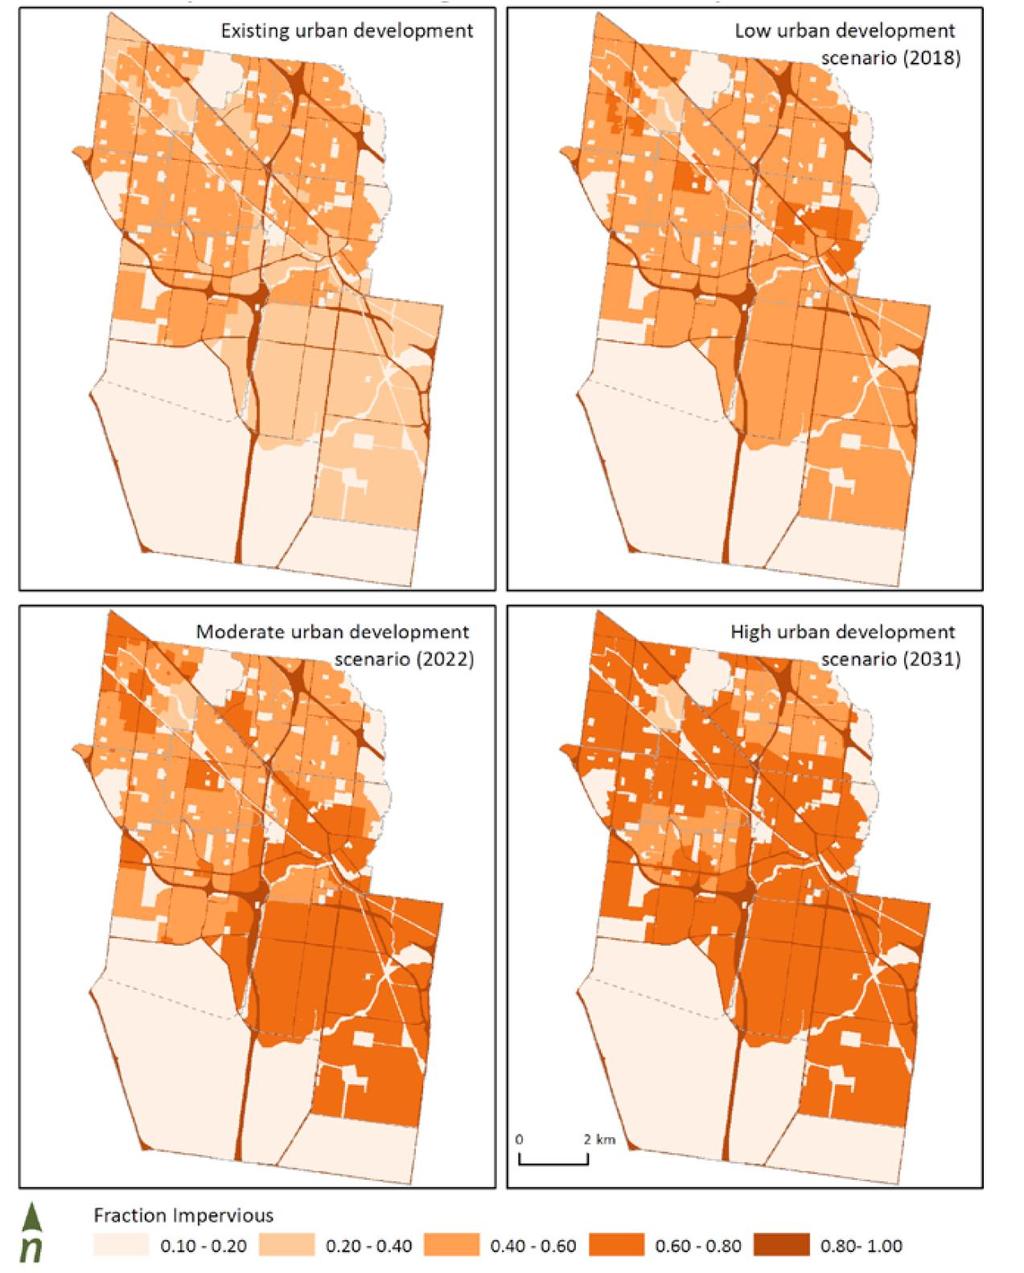 Figure 1 - Urban Development and Impervious Area (taken from in figure 3 of the